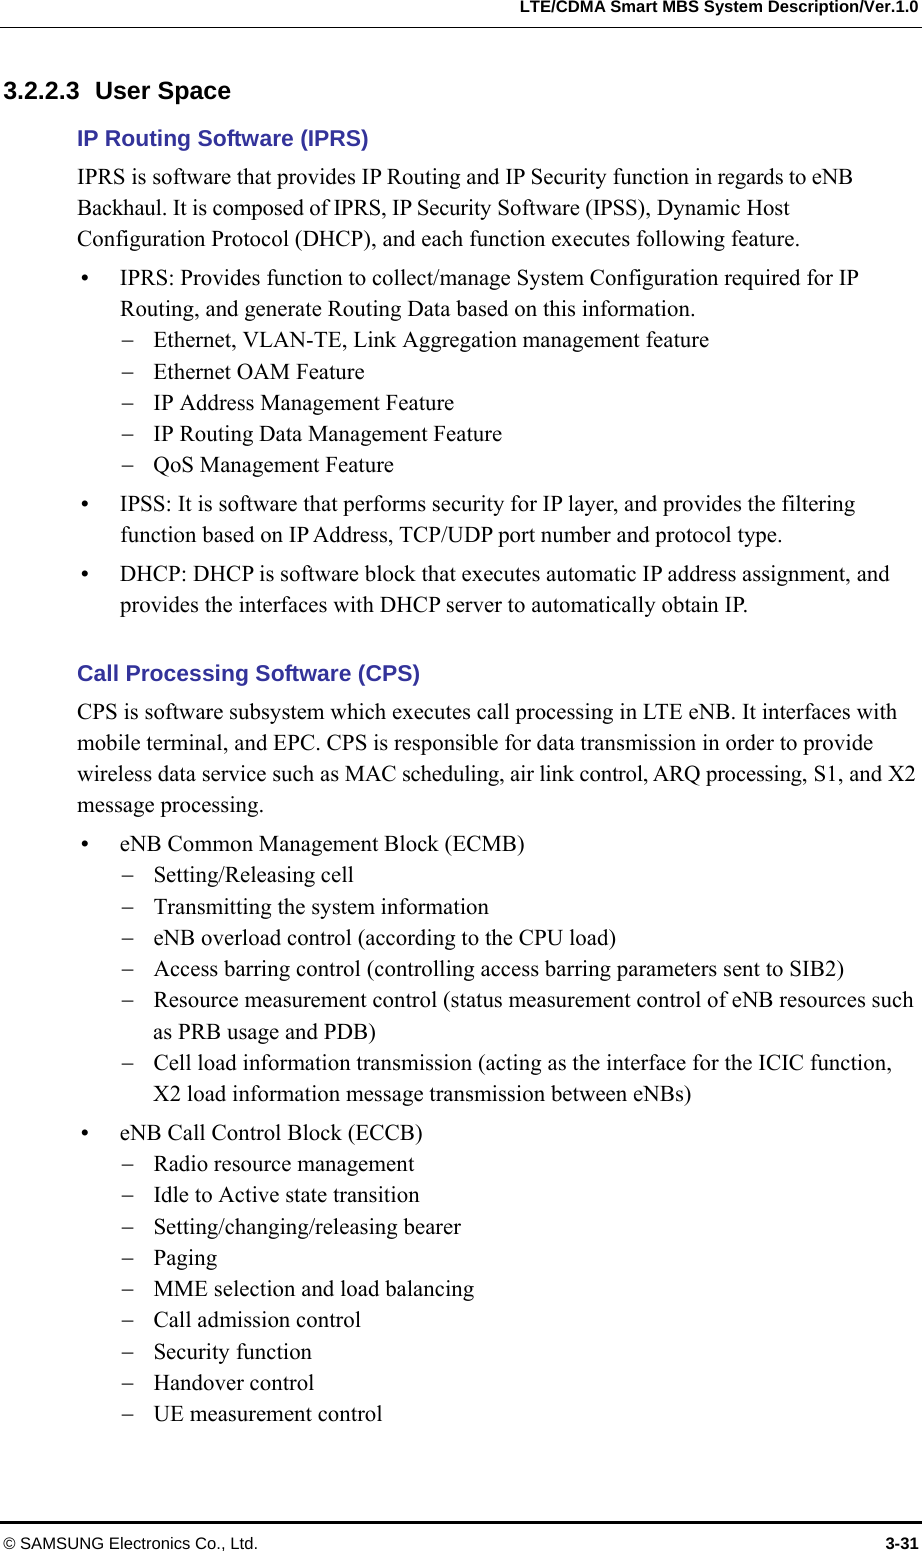   LTE/CDMA Smart MBS System Description/Ver.1.0 © SAMSUNG Electronics Co., Ltd.  3-31 3.2.2.3 User Space IP Routing Software (IPRS) IPRS is software that provides IP Routing and IP Security function in regards to eNB Backhaul. It is composed of IPRS, IP Security Software (IPSS), Dynamic Host Configuration Protocol (DHCP), and each function executes following feature.  IPRS: Provides function to collect/manage System Configuration required for IP Routing, and generate Routing Data based on this information.  Ethernet, VLAN-TE, Link Aggregation management feature  Ethernet OAM Feature  IP Address Management Feature  IP Routing Data Management Feature  QoS Management Feature  IPSS: It is software that performs security for IP layer, and provides the filtering function based on IP Address, TCP/UDP port number and protocol type.    DHCP: DHCP is software block that executes automatic IP address assignment, and provides the interfaces with DHCP server to automatically obtain IP.  Call Processing Software (CPS) CPS is software subsystem which executes call processing in LTE eNB. It interfaces with mobile terminal, and EPC. CPS is responsible for data transmission in order to provide wireless data service such as MAC scheduling, air link control, ARQ processing, S1, and X2 message processing.  eNB Common Management Block (ECMB)  Setting/Releasing cell  Transmitting the system information    eNB overload control (according to the CPU load)  Access barring control (controlling access barring parameters sent to SIB2)  Resource measurement control (status measurement control of eNB resources such as PRB usage and PDB)  Cell load information transmission (acting as the interface for the ICIC function, X2 load information message transmission between eNBs)  eNB Call Control Block (ECCB)  Radio resource management  Idle to Active state transition  Setting/changing/releasing bearer  Paging    MME selection and load balancing    Call admission control    Security function  Handover control    UE measurement control 